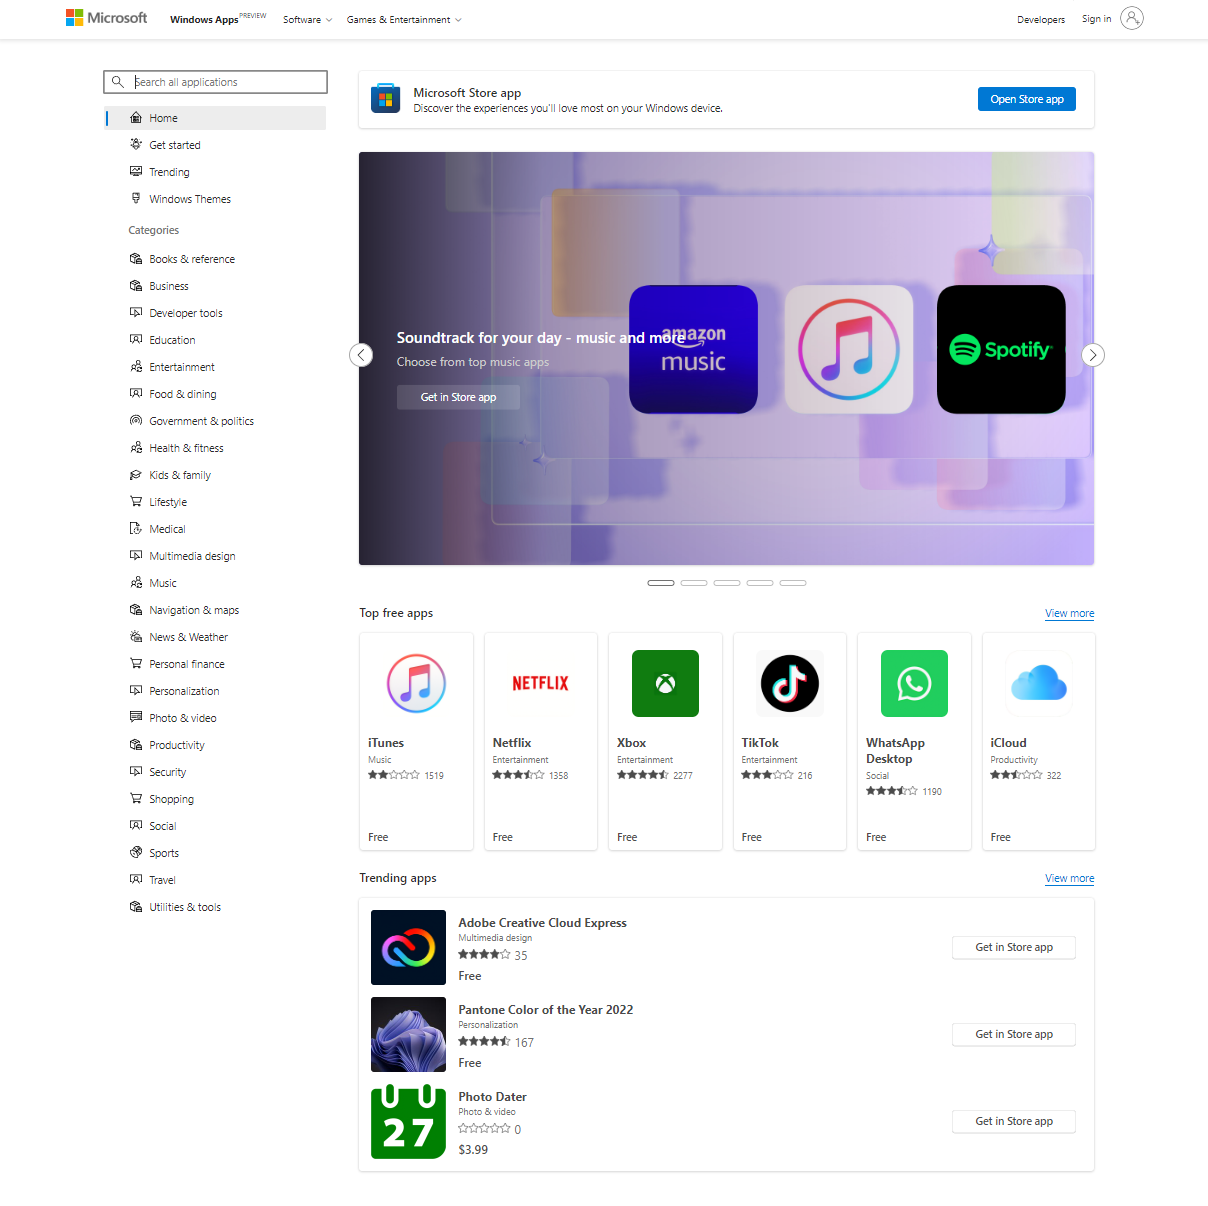 Microsoft Store Web App has a new look with a search bar, app category, and more